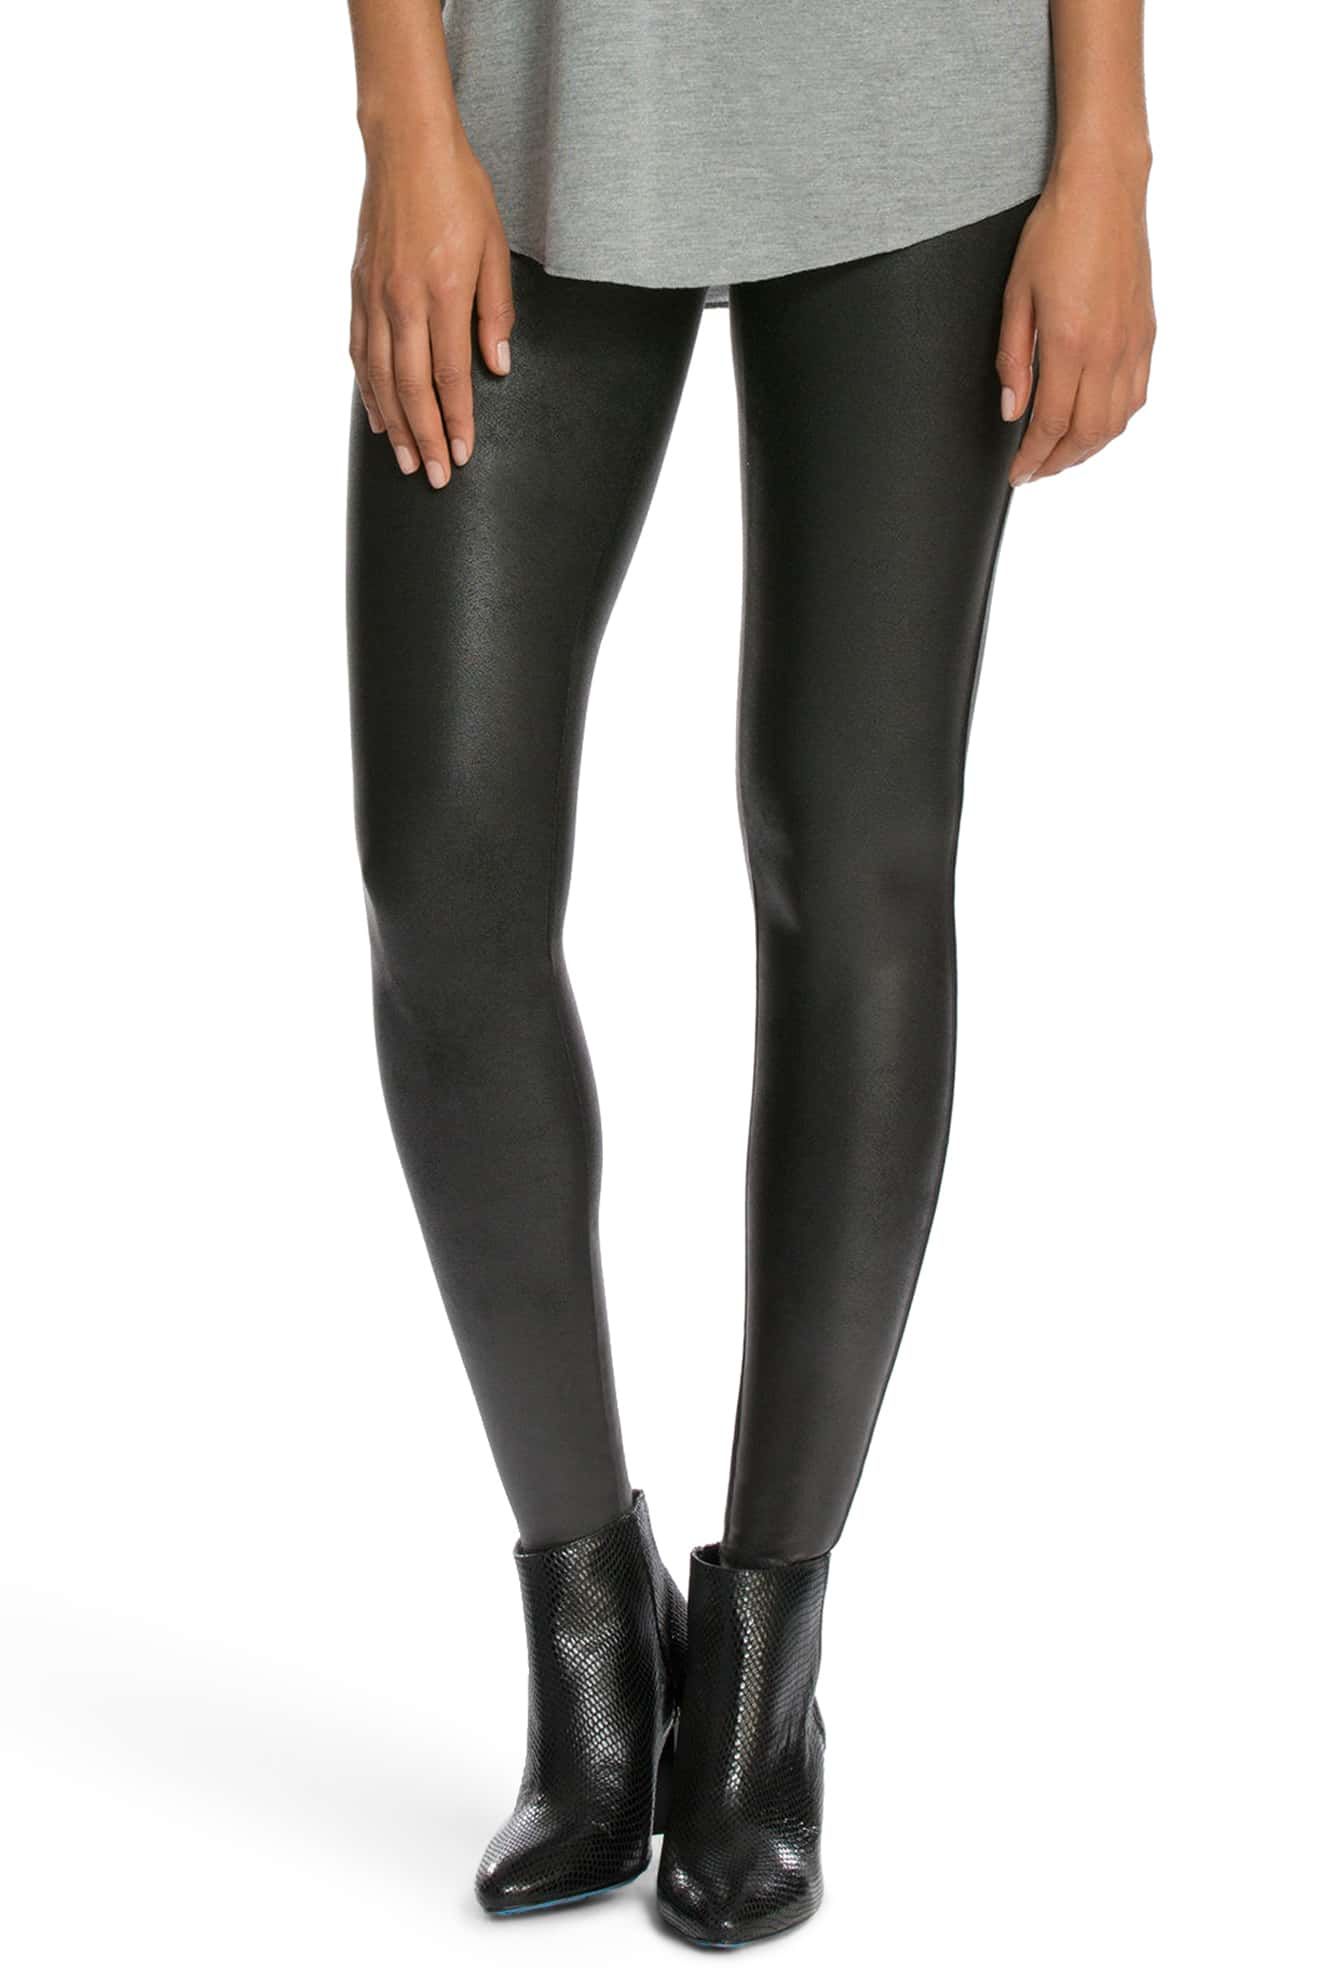 Spanx Moto Leggings Outfitters  International Society of Precision  Agriculture